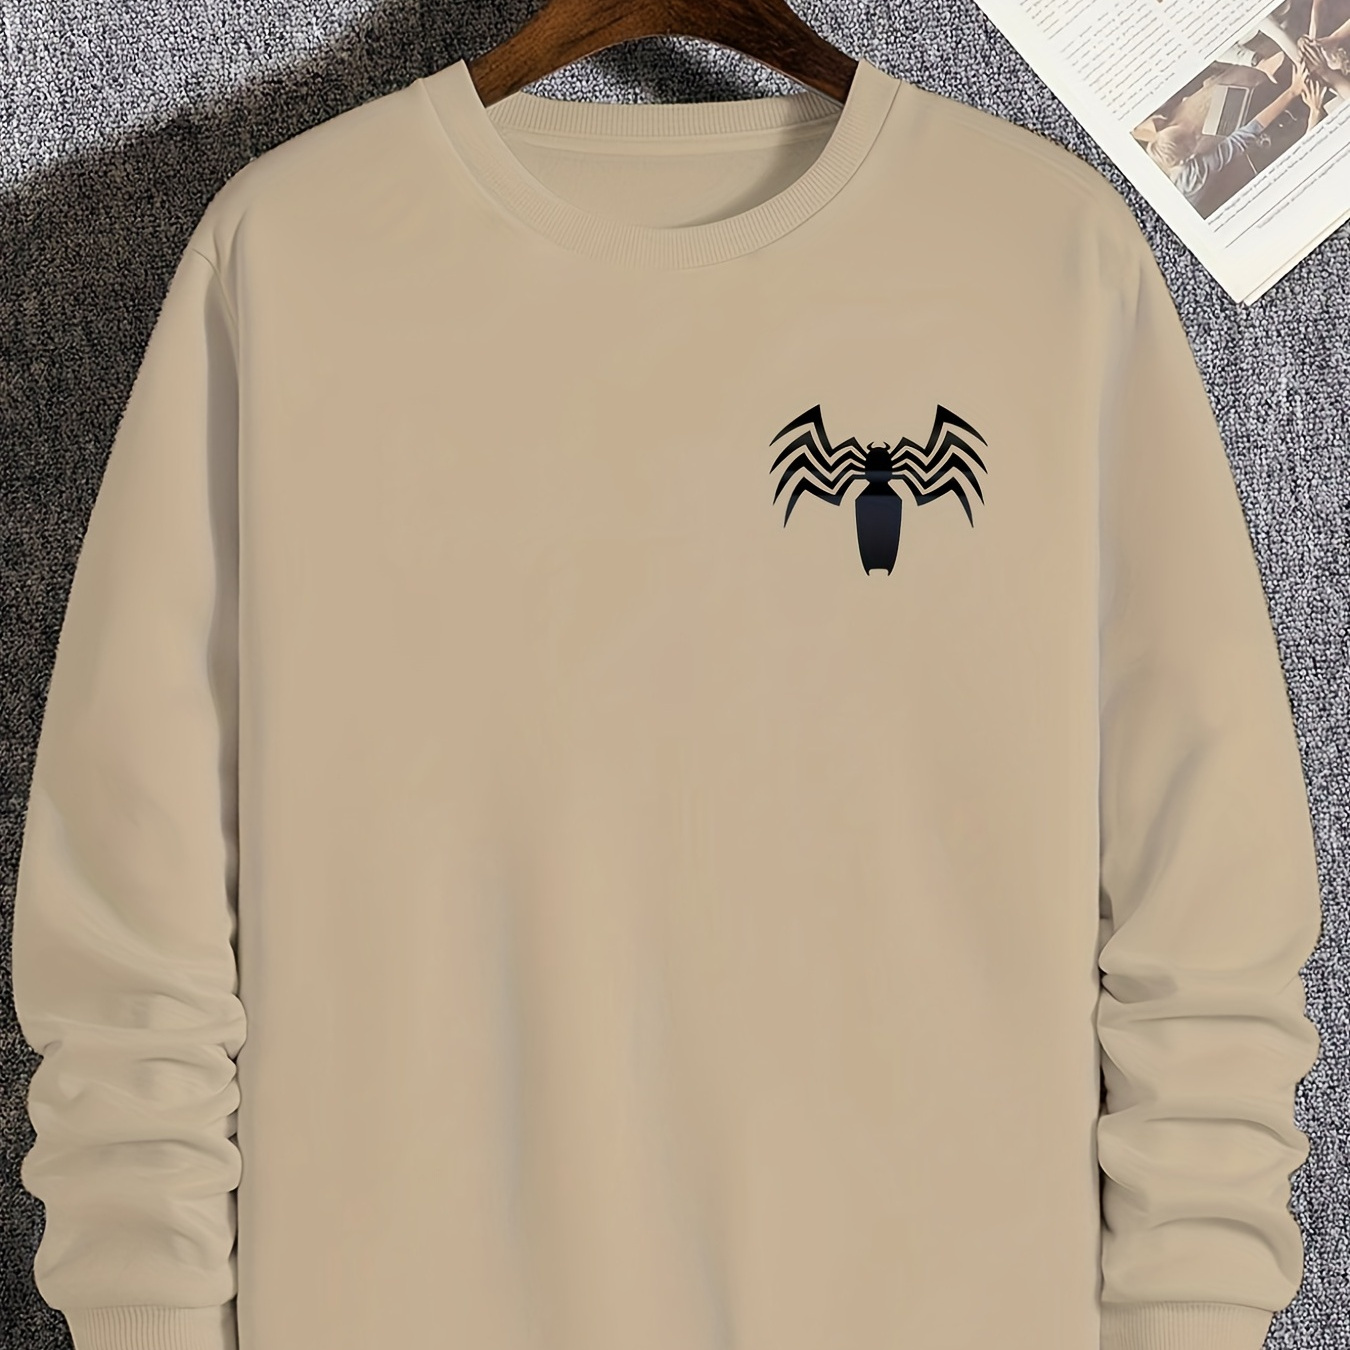 

Men's Plus Size Pullover, Comfy Long Sleeve Sweatshirt With Creative Animal Print